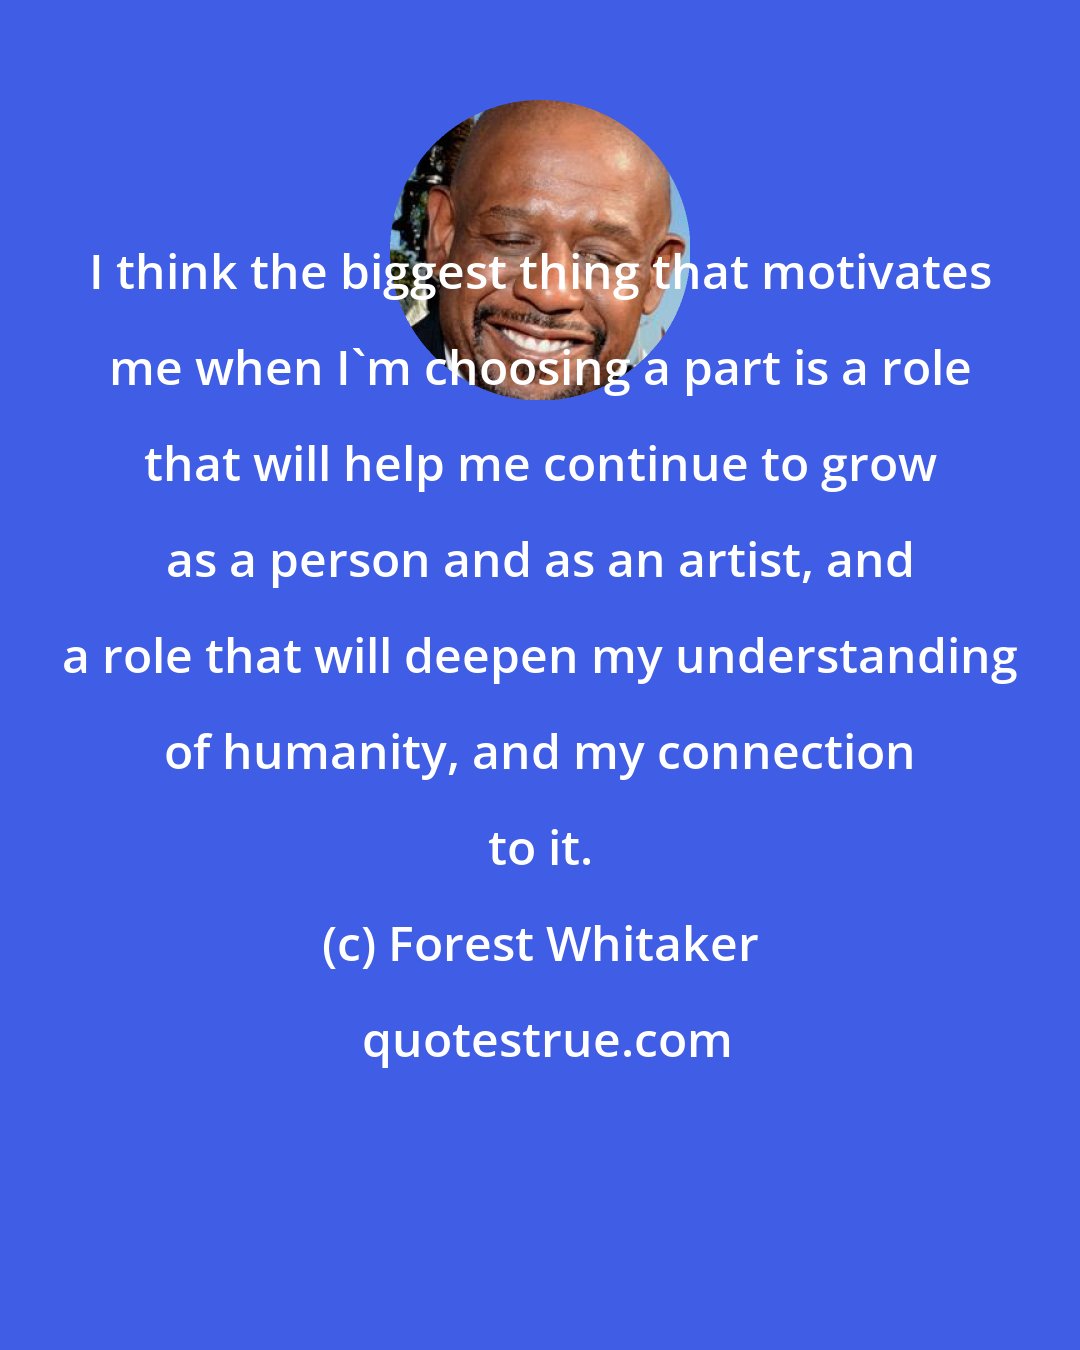 Forest Whitaker: I think the biggest thing that motivates me when I'm choosing a part is a role that will help me continue to grow as a person and as an artist, and a role that will deepen my understanding of humanity, and my connection to it.